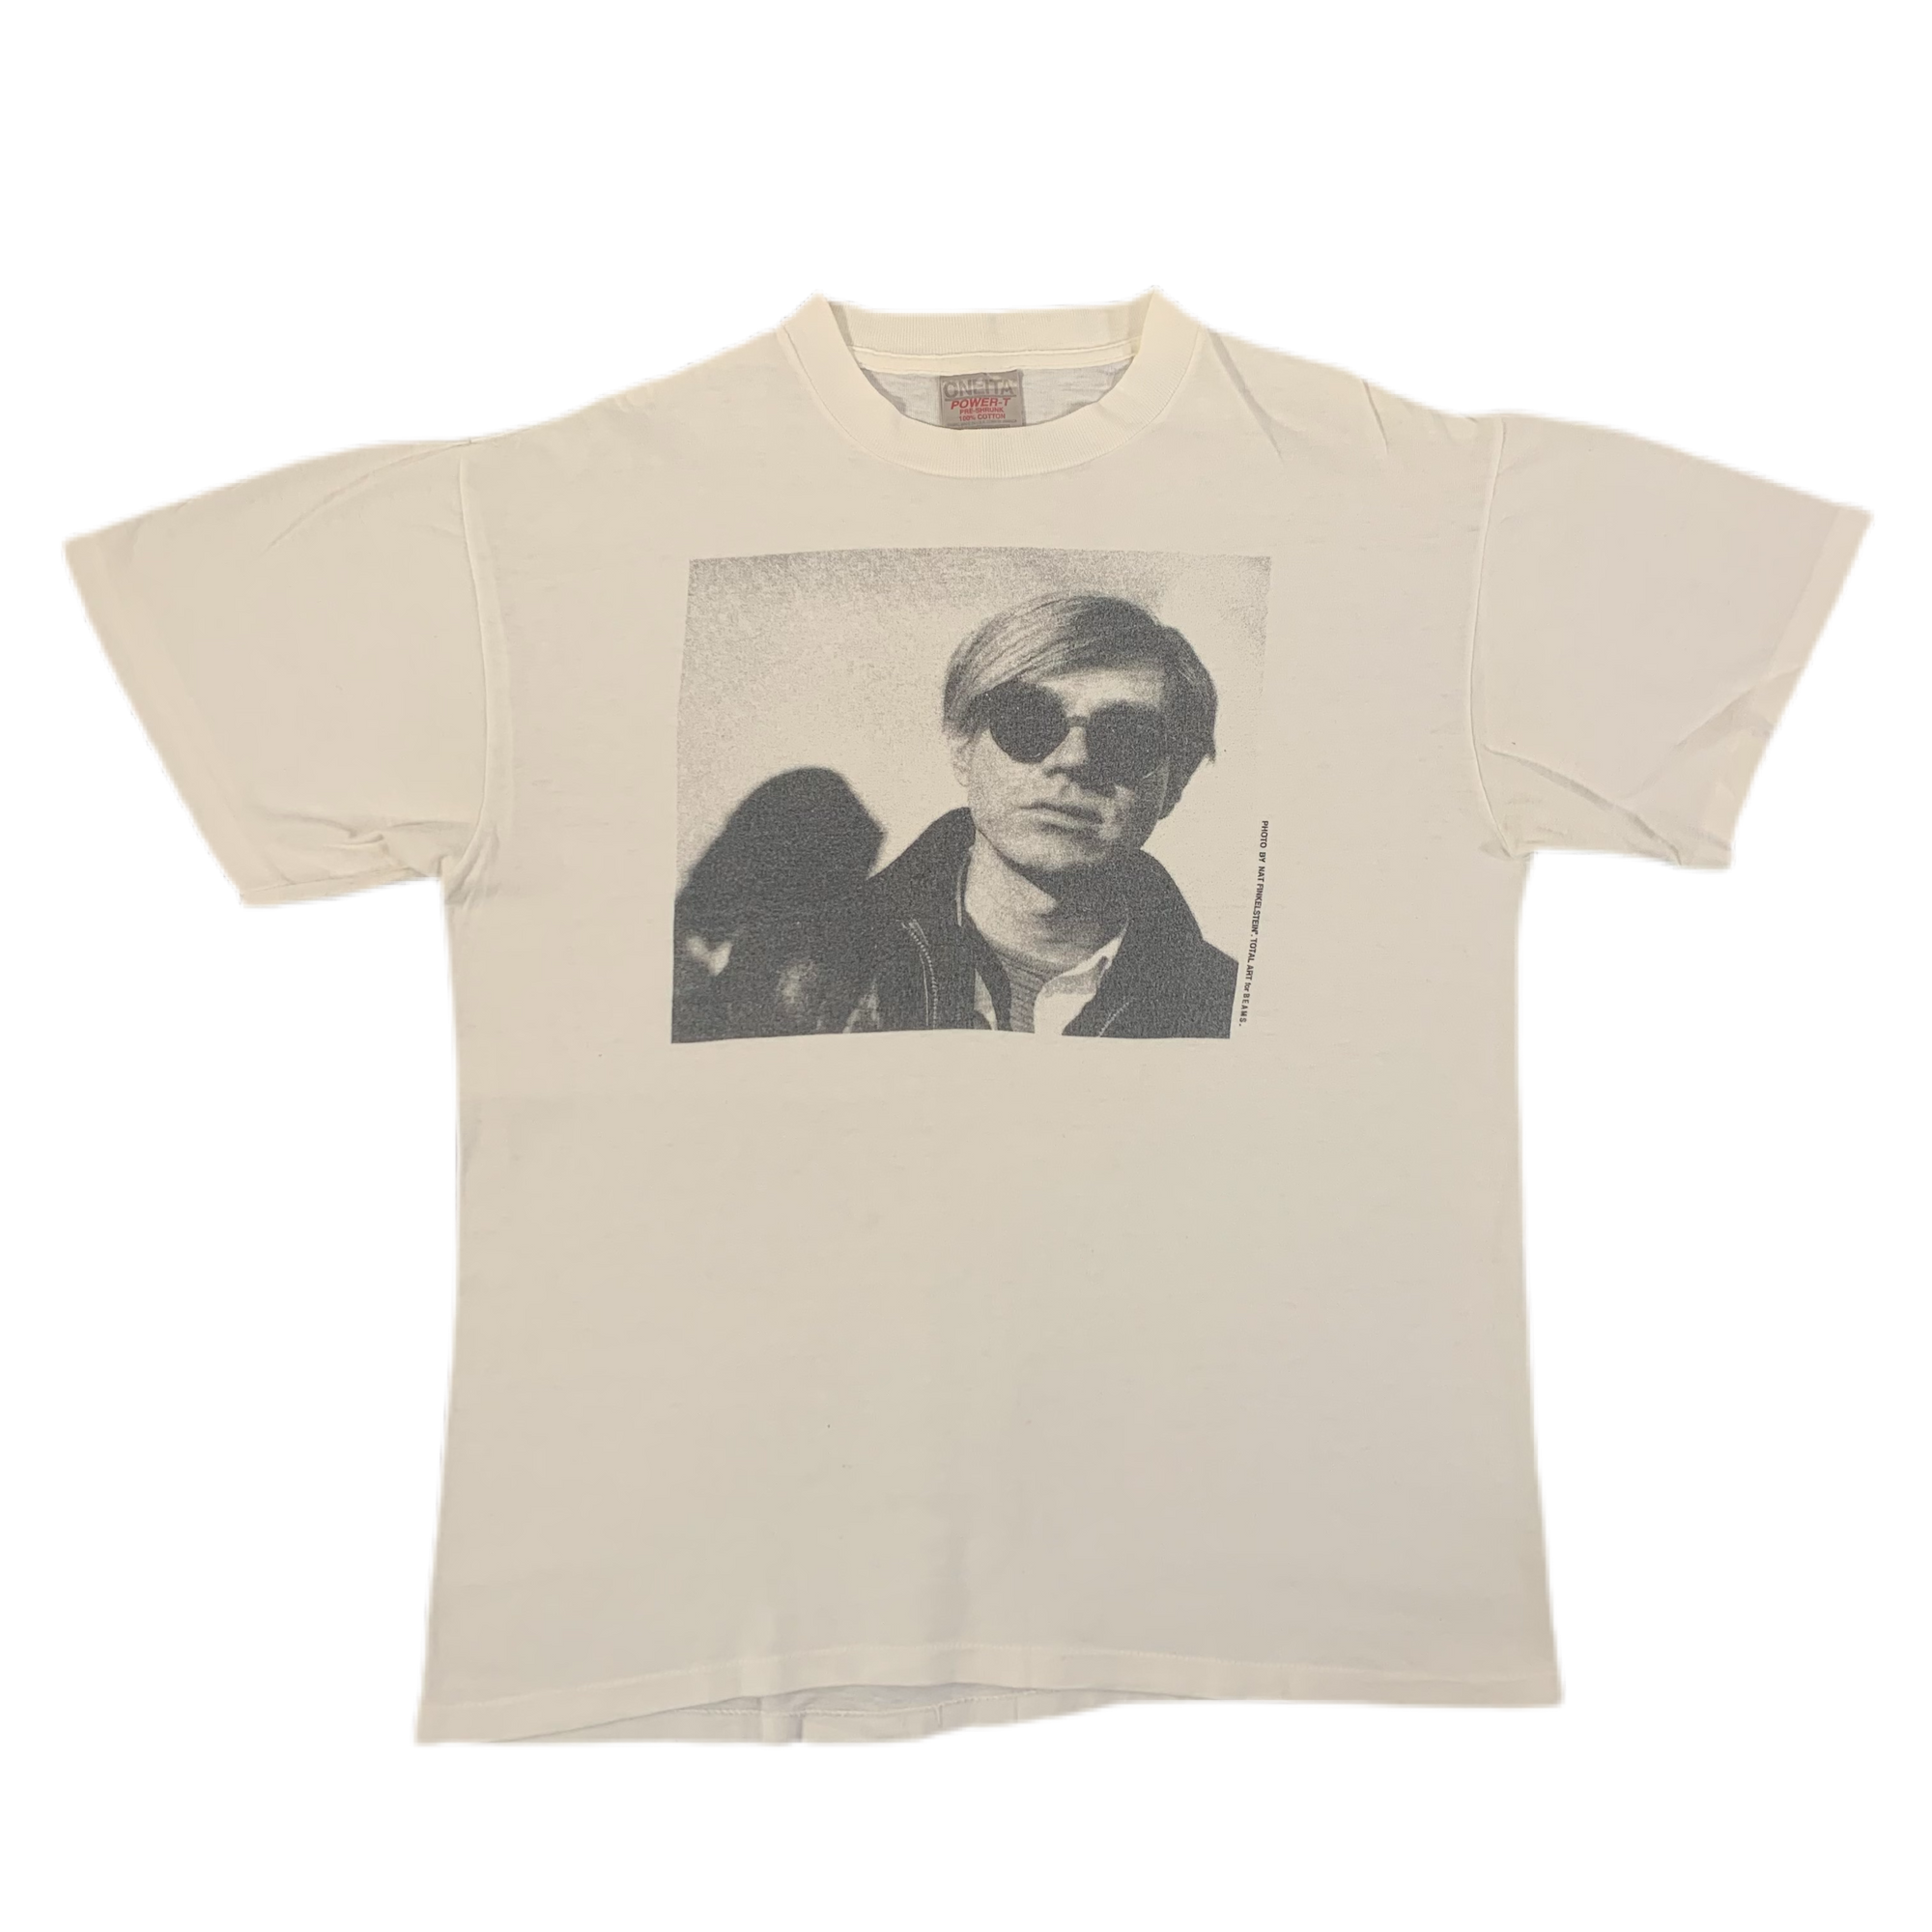 Vintage Andy Warhol By Nat Finklestein "Factory Years" T-Shirt - jointcustodydc